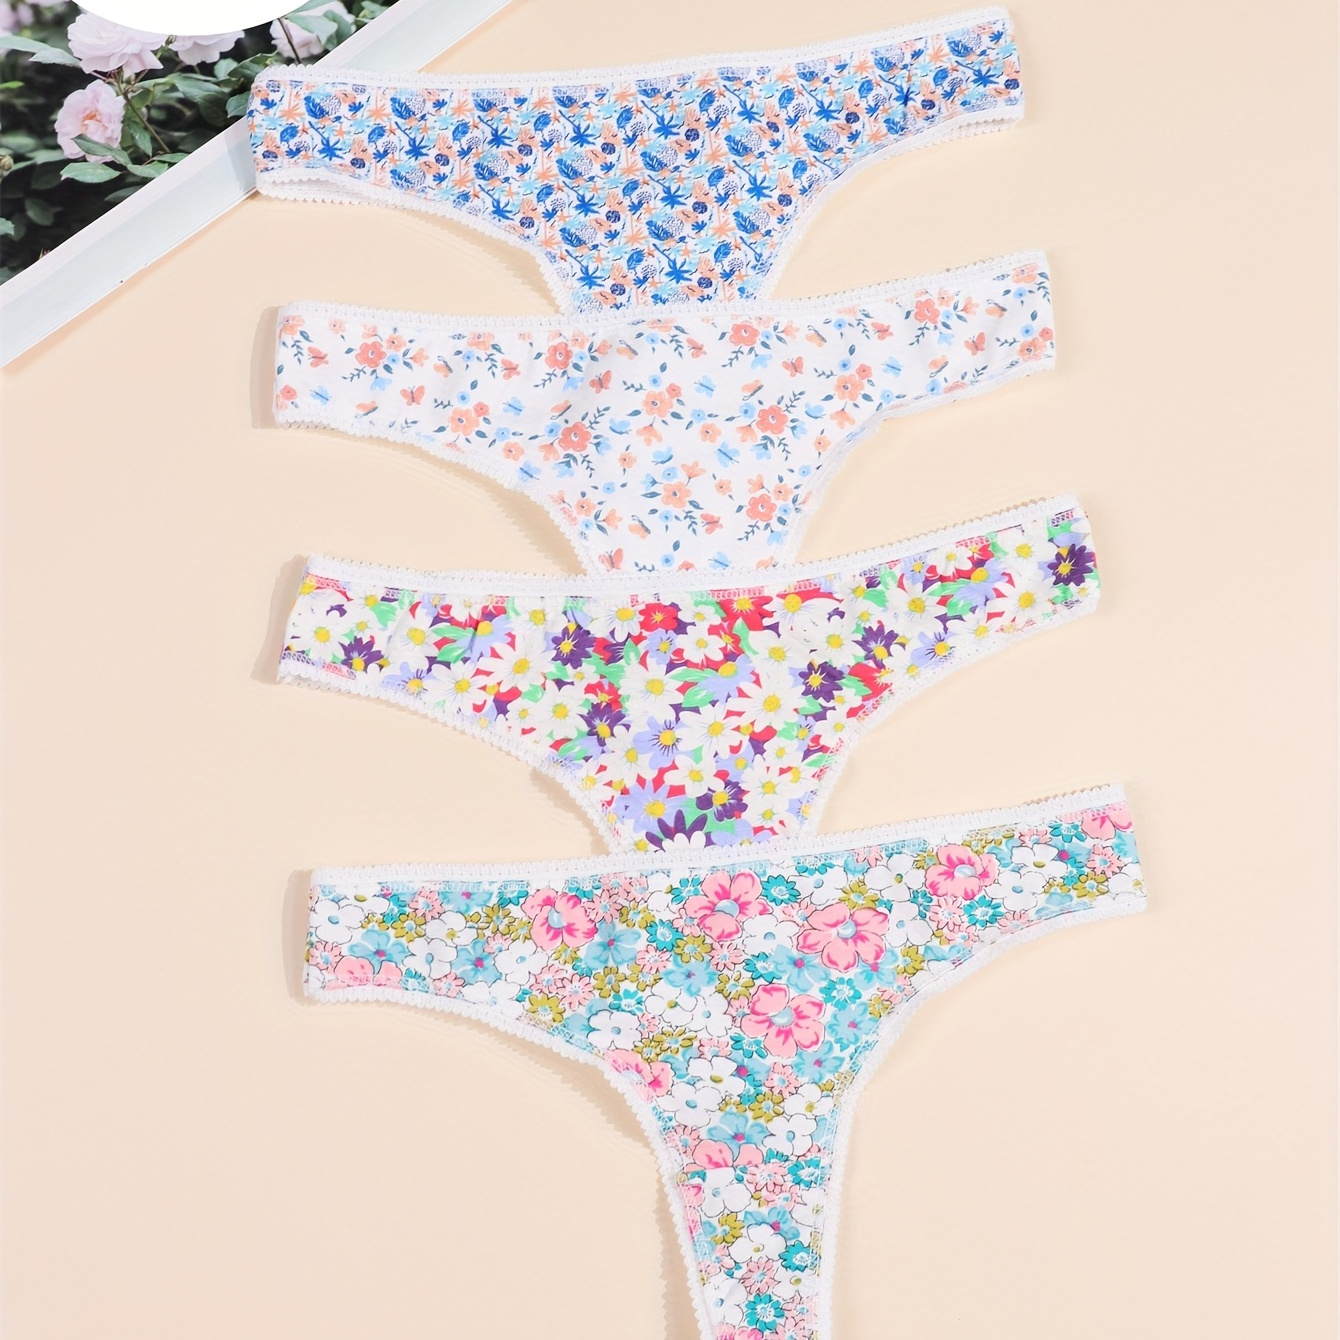 

4pcs Floral Allover Print Cotton Thongs, Cute Valentine's Day Comfy & Stretchy Lace Trim Intimates Panties, Women's Lingerie & Underwear 4packs Assorted